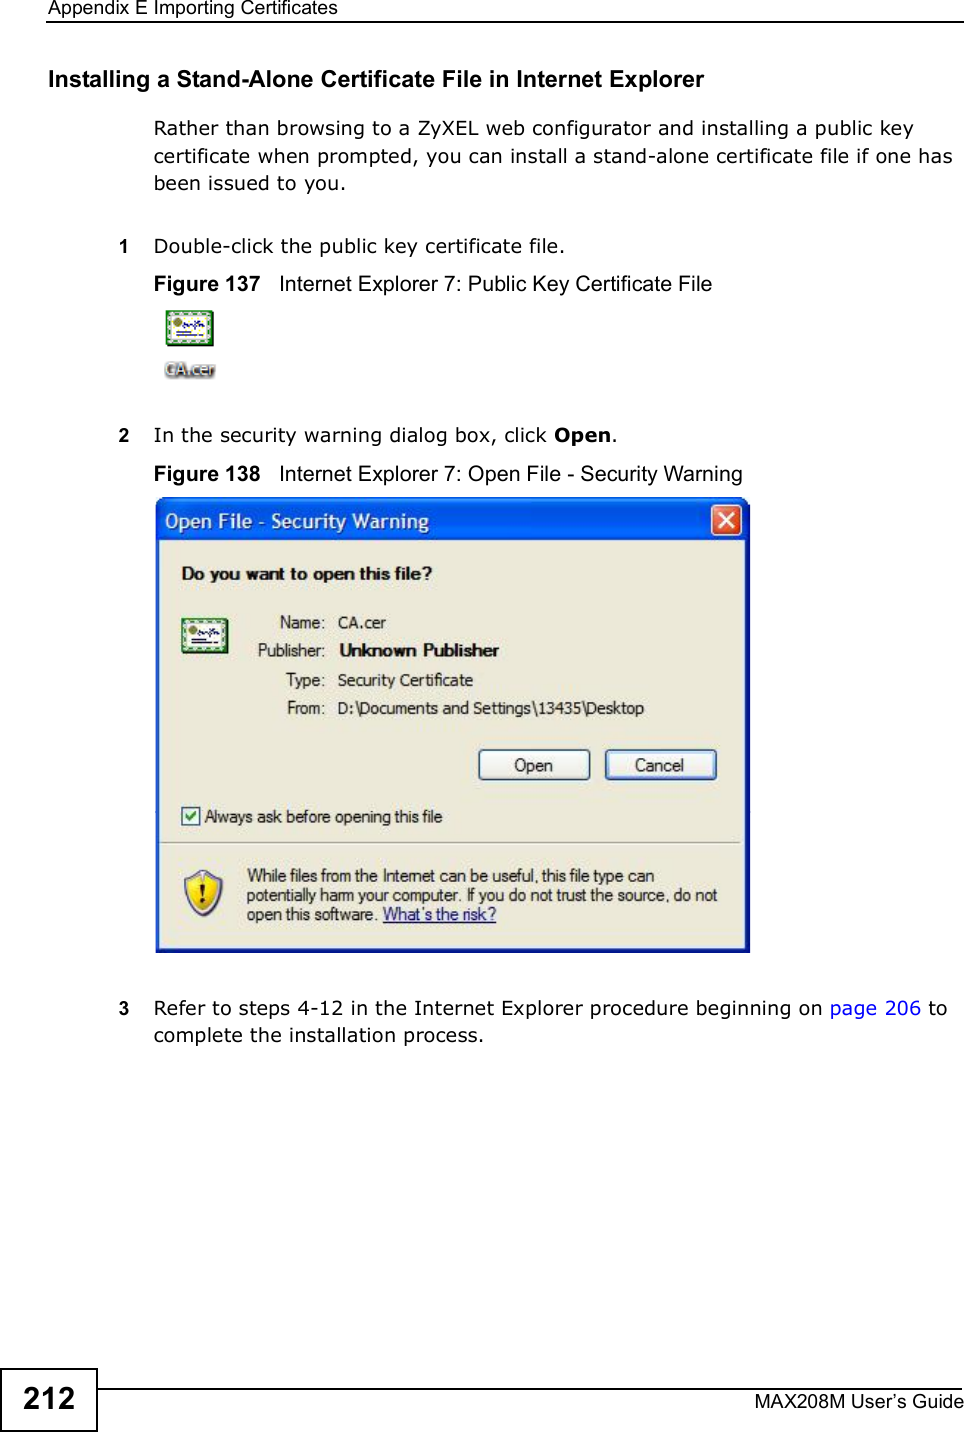 Appendix EImporting CertificatesMAX208M User s Guide212Installing a Stand-Alone Certificate File in Internet ExplorerRather than browsing to a ZyXEL web configurator and installing a public key certificate when prompted, you can install a stand-alone certificate file if one has been issued to you.1Double-click the public key certificate file.Figure 137   Internet Explorer 7: Public Key Certificate File2In the security warning dialog box, click Open.Figure 138   Internet Explorer 7: Open File - Security Warning3Refer to steps 4-12 in the Internet Explorer procedure beginning on page206 to complete the installation process.